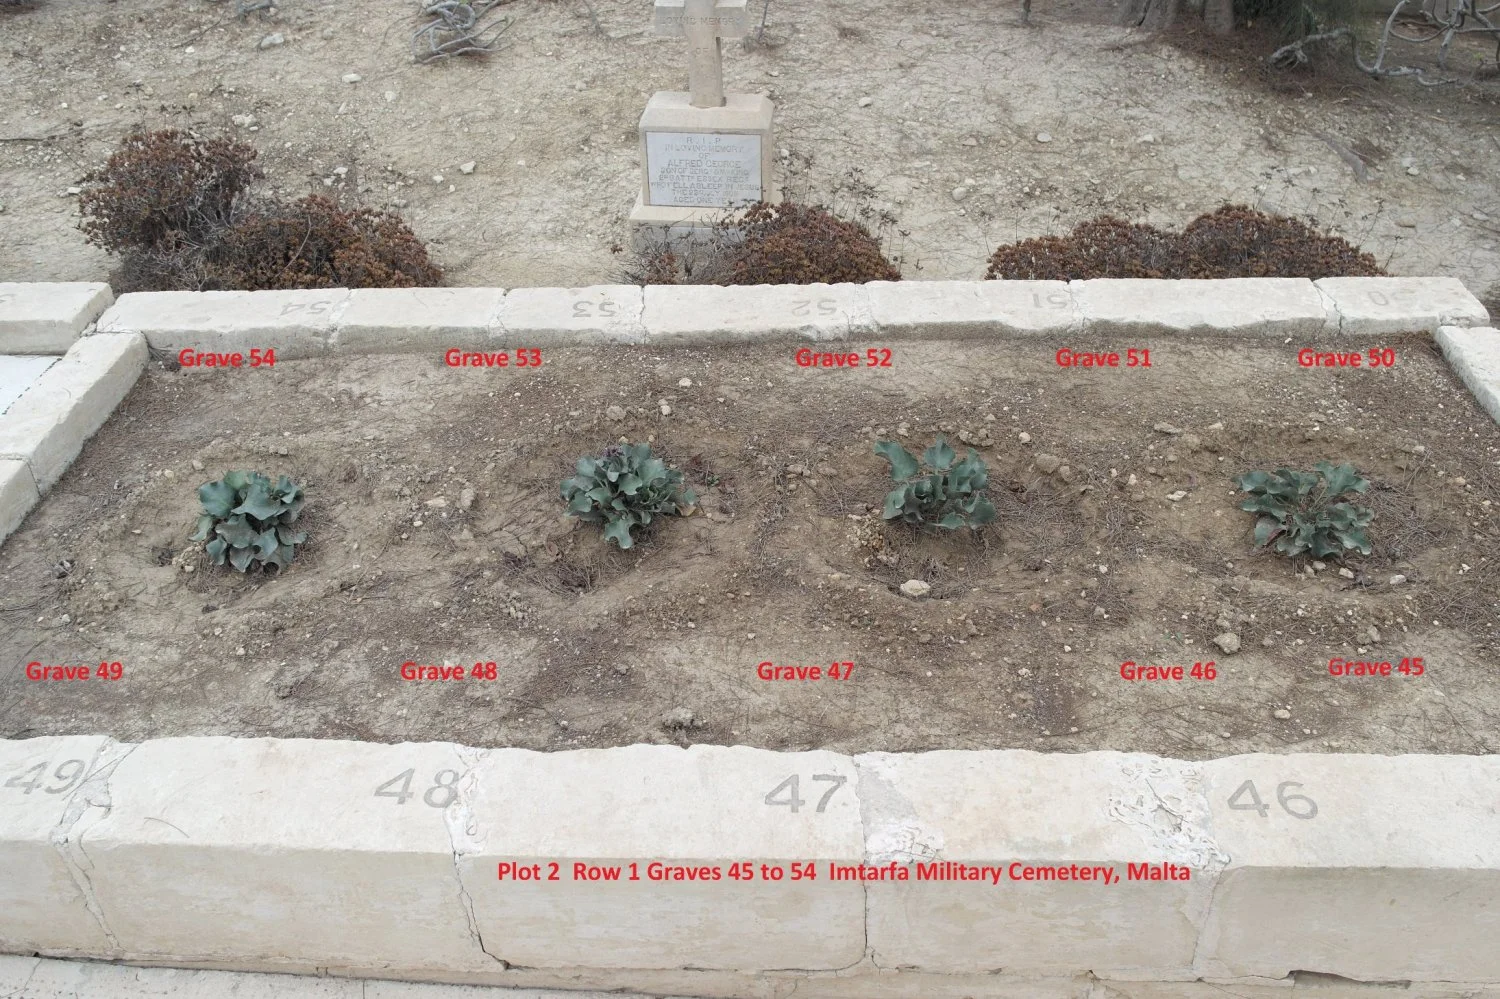 Plot 2.Row1 Back row Graves 50 to 54.  Front row Grave 45 to 49